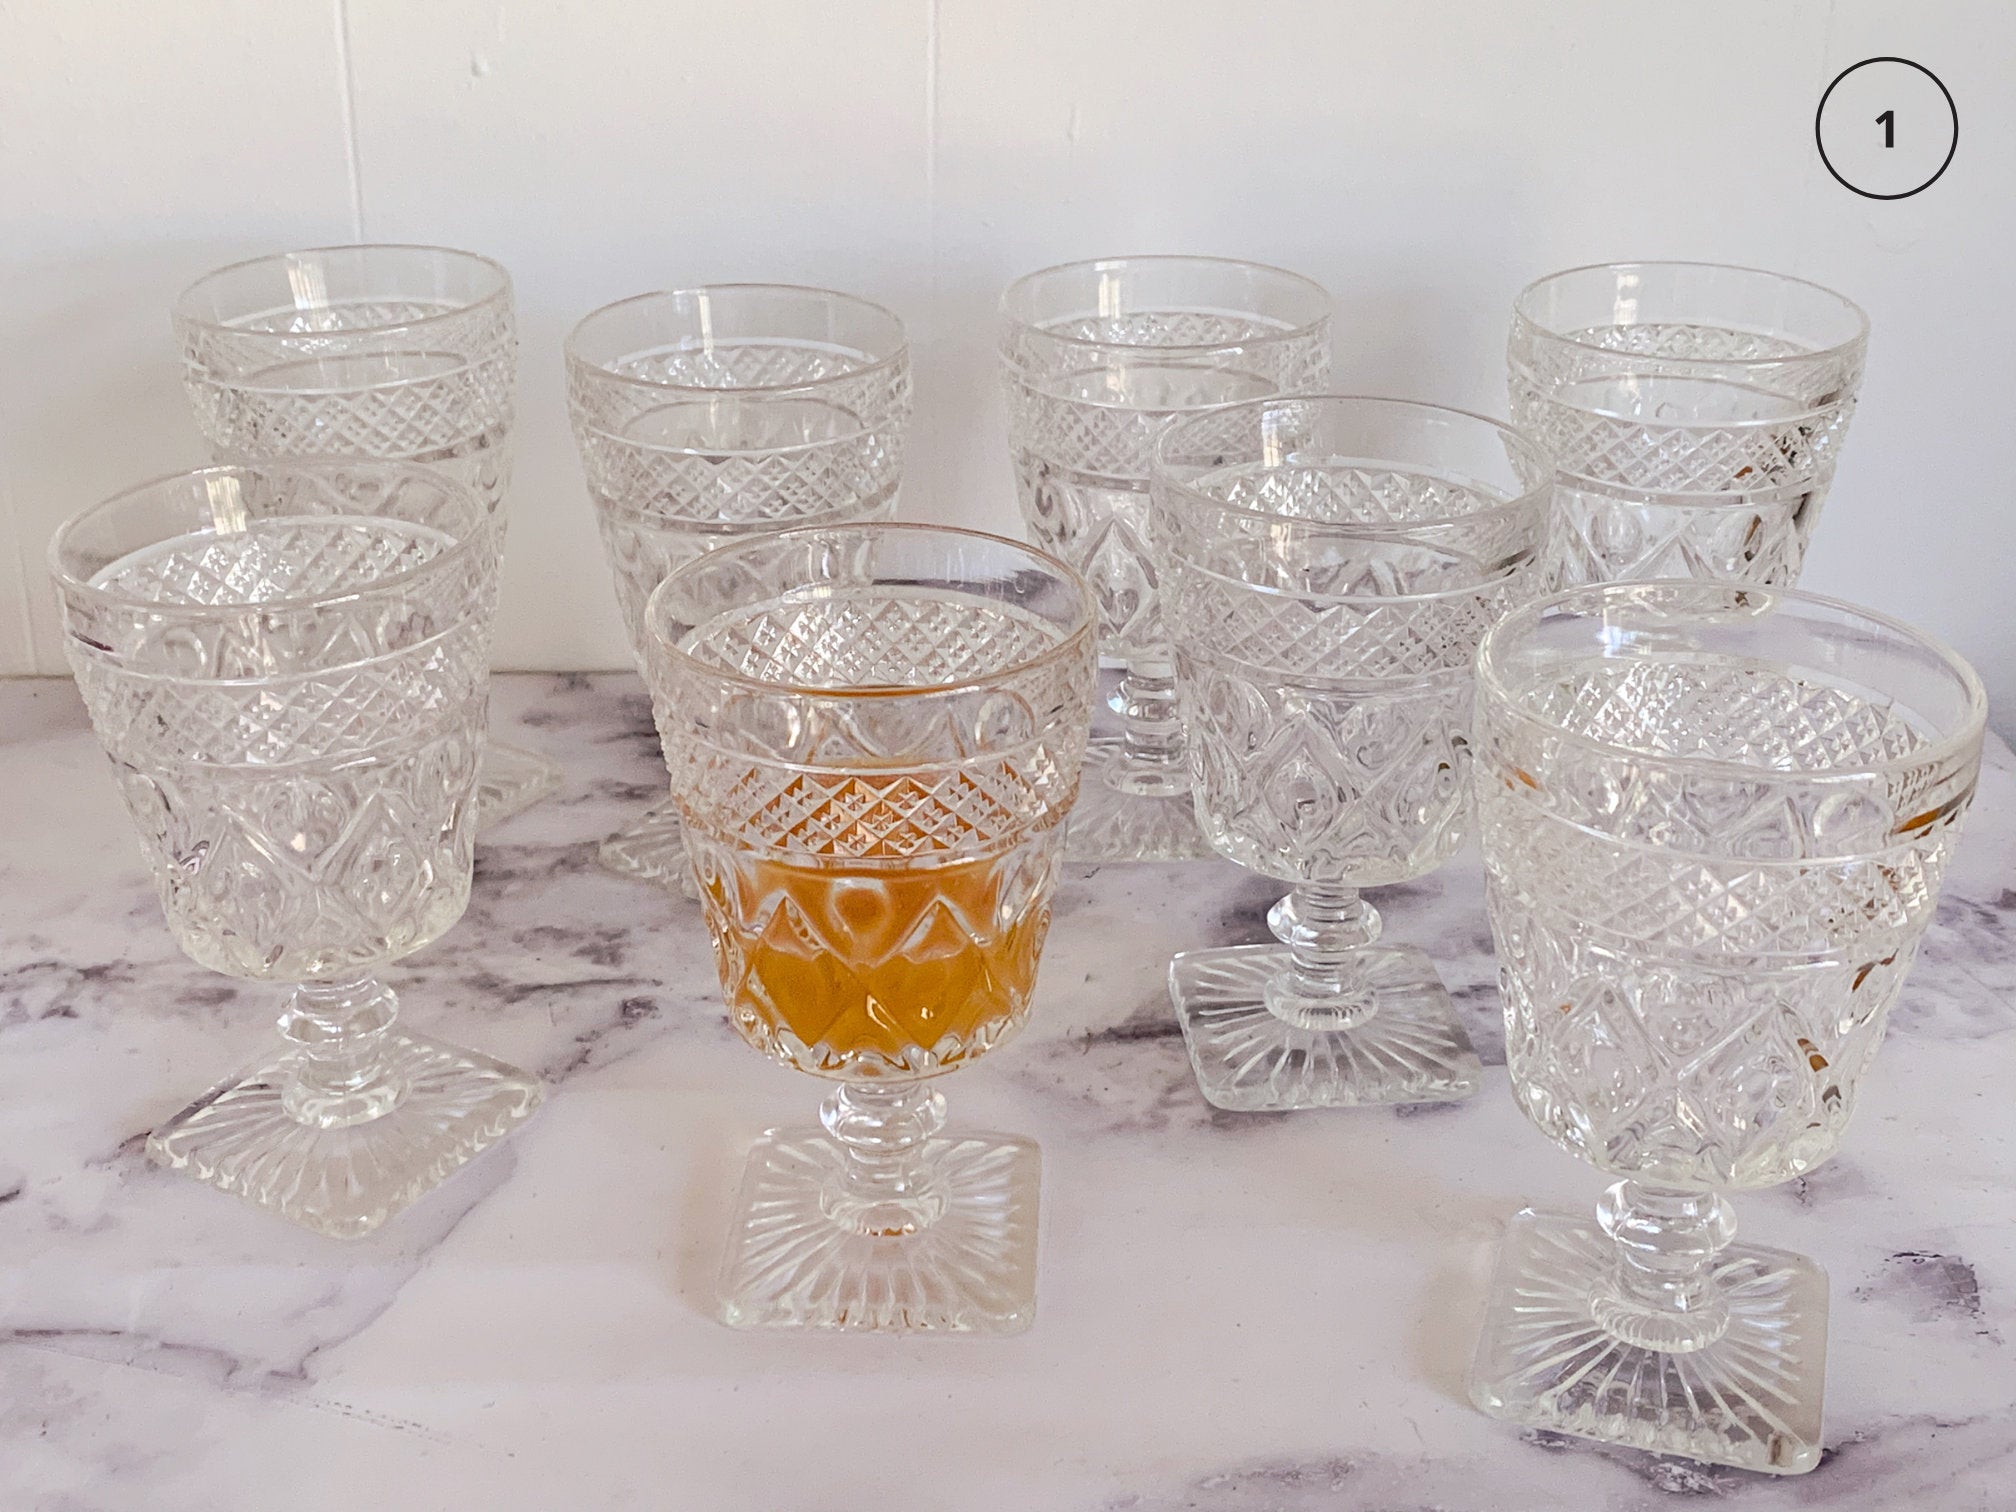 Mix and Match Vintage Pressed Clear Glass Goblets and Tumblers | Mid Century Juice and Water Glasses